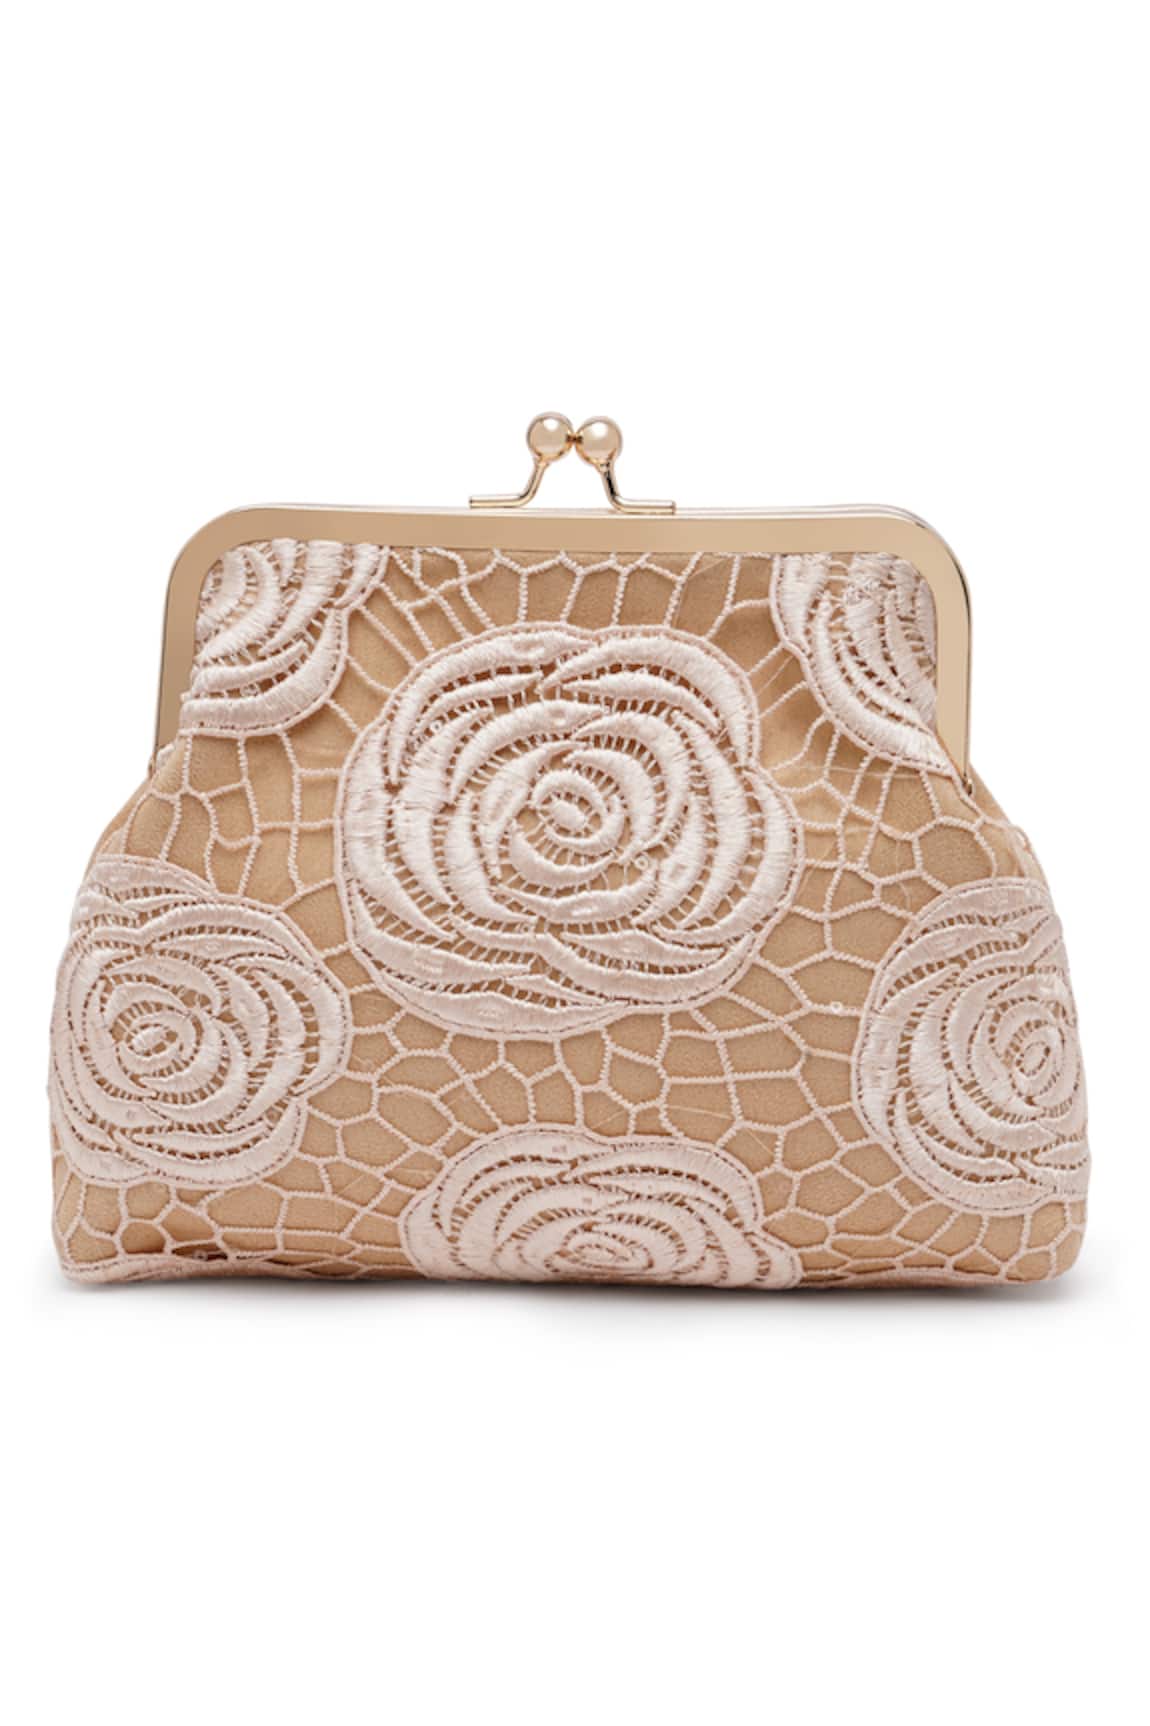 Richa Gupta Floral Lace Embroidered Clutch With Sling